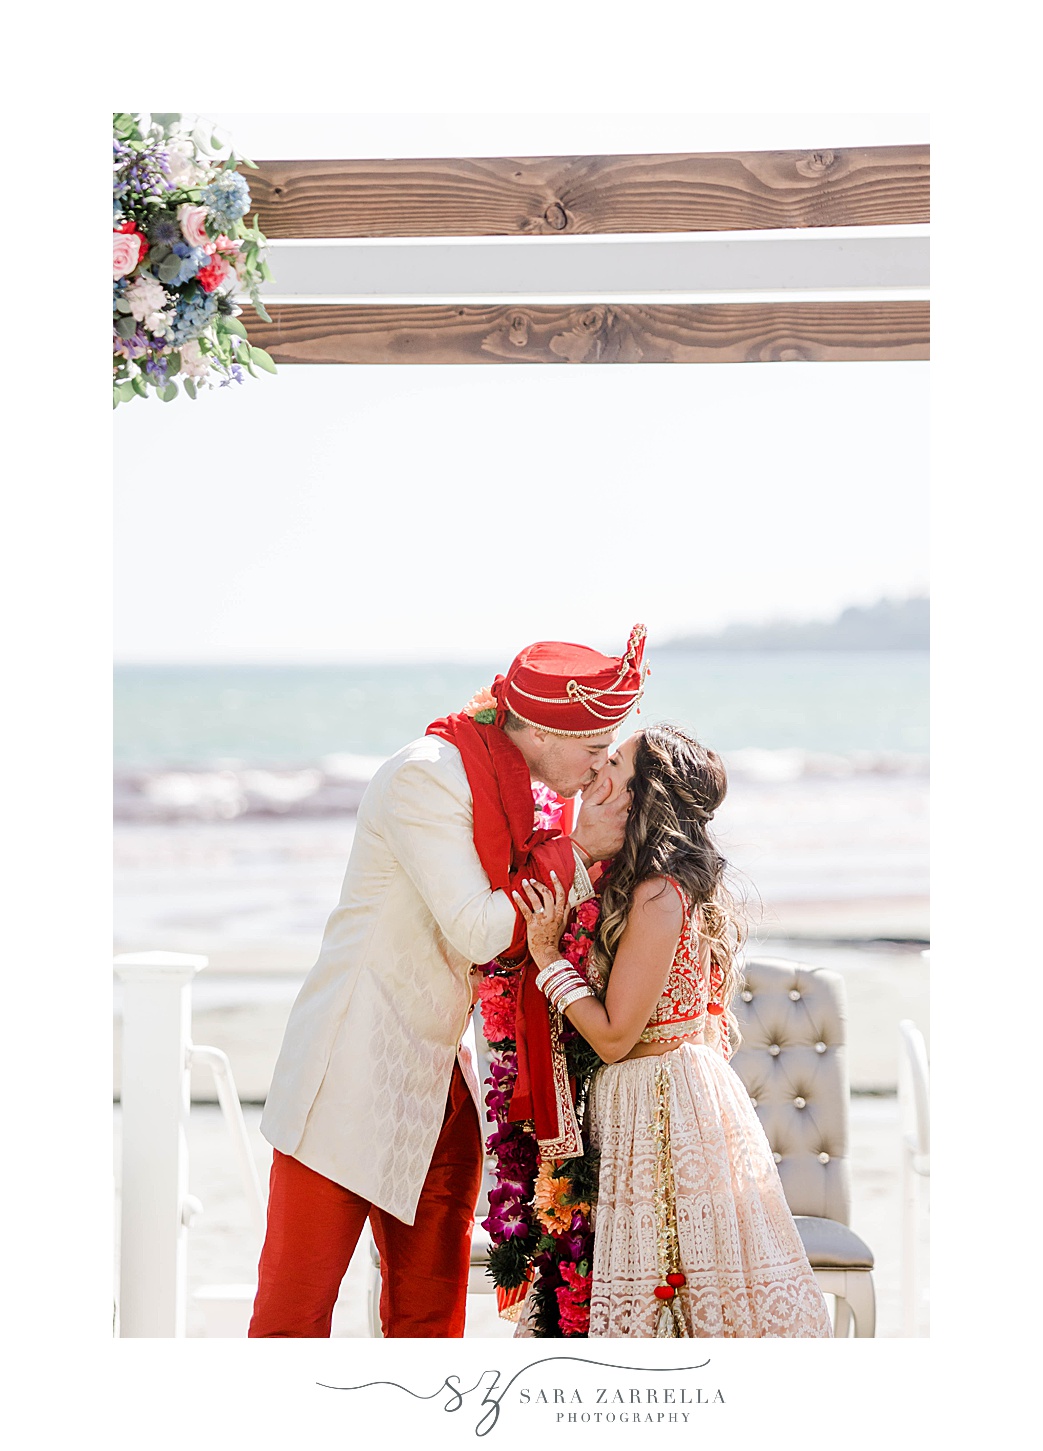 newlyweds kiss after traditional Indian wedding ceremony at Newport Beach House